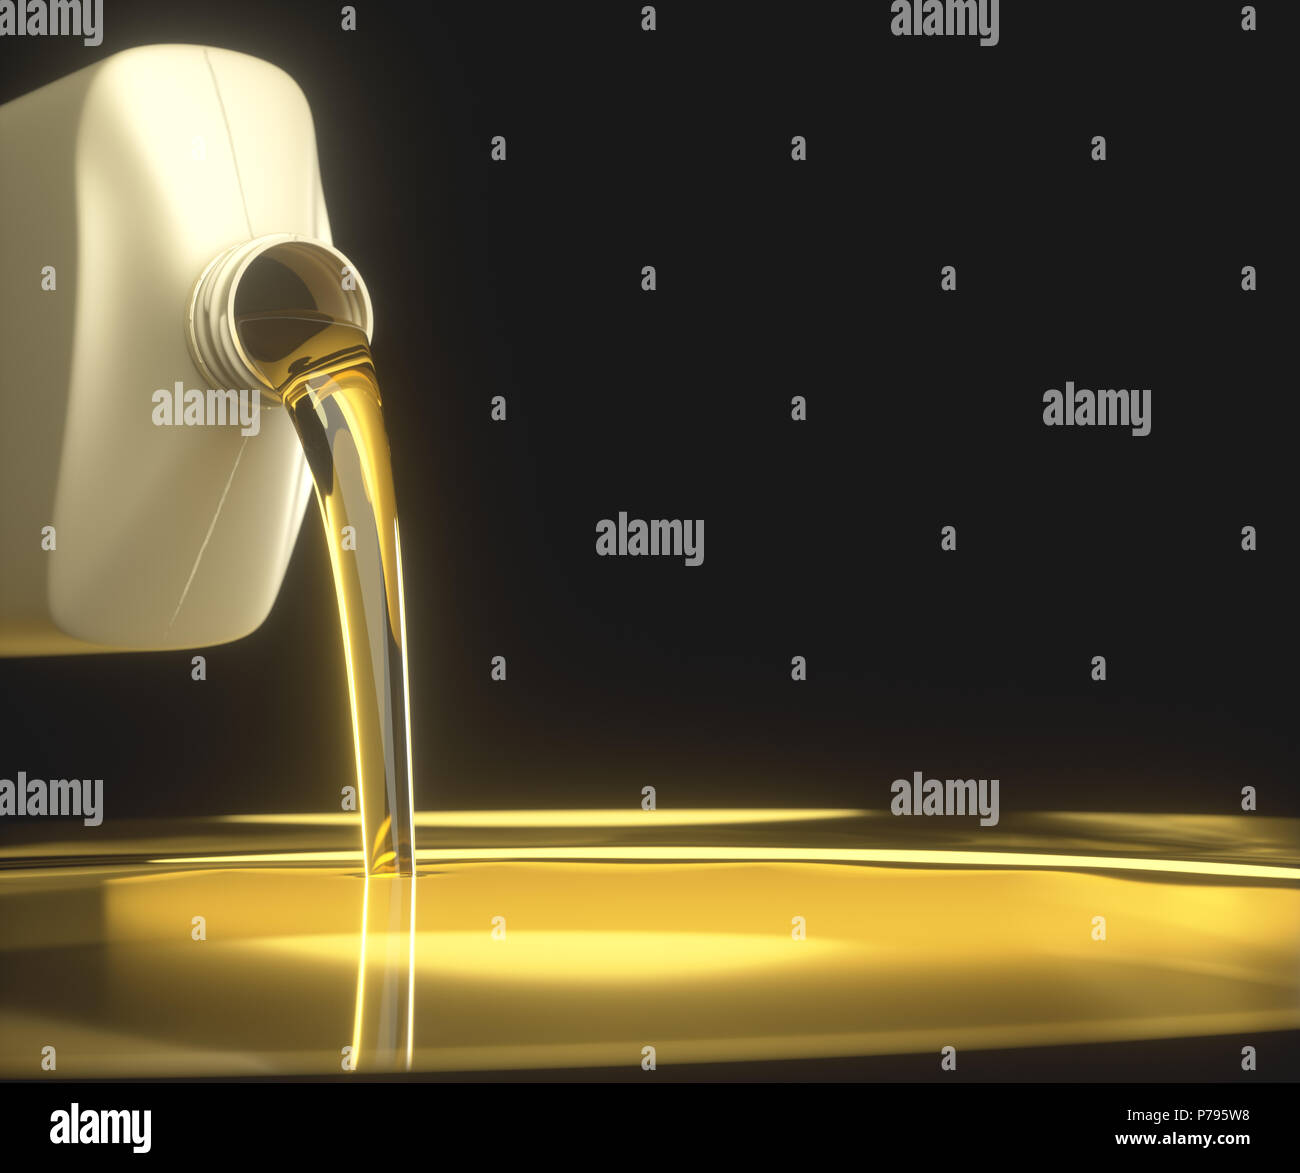 3D illustration. Pouring engine oil on flat surface with black background. Your text on the black background. Stock Photo